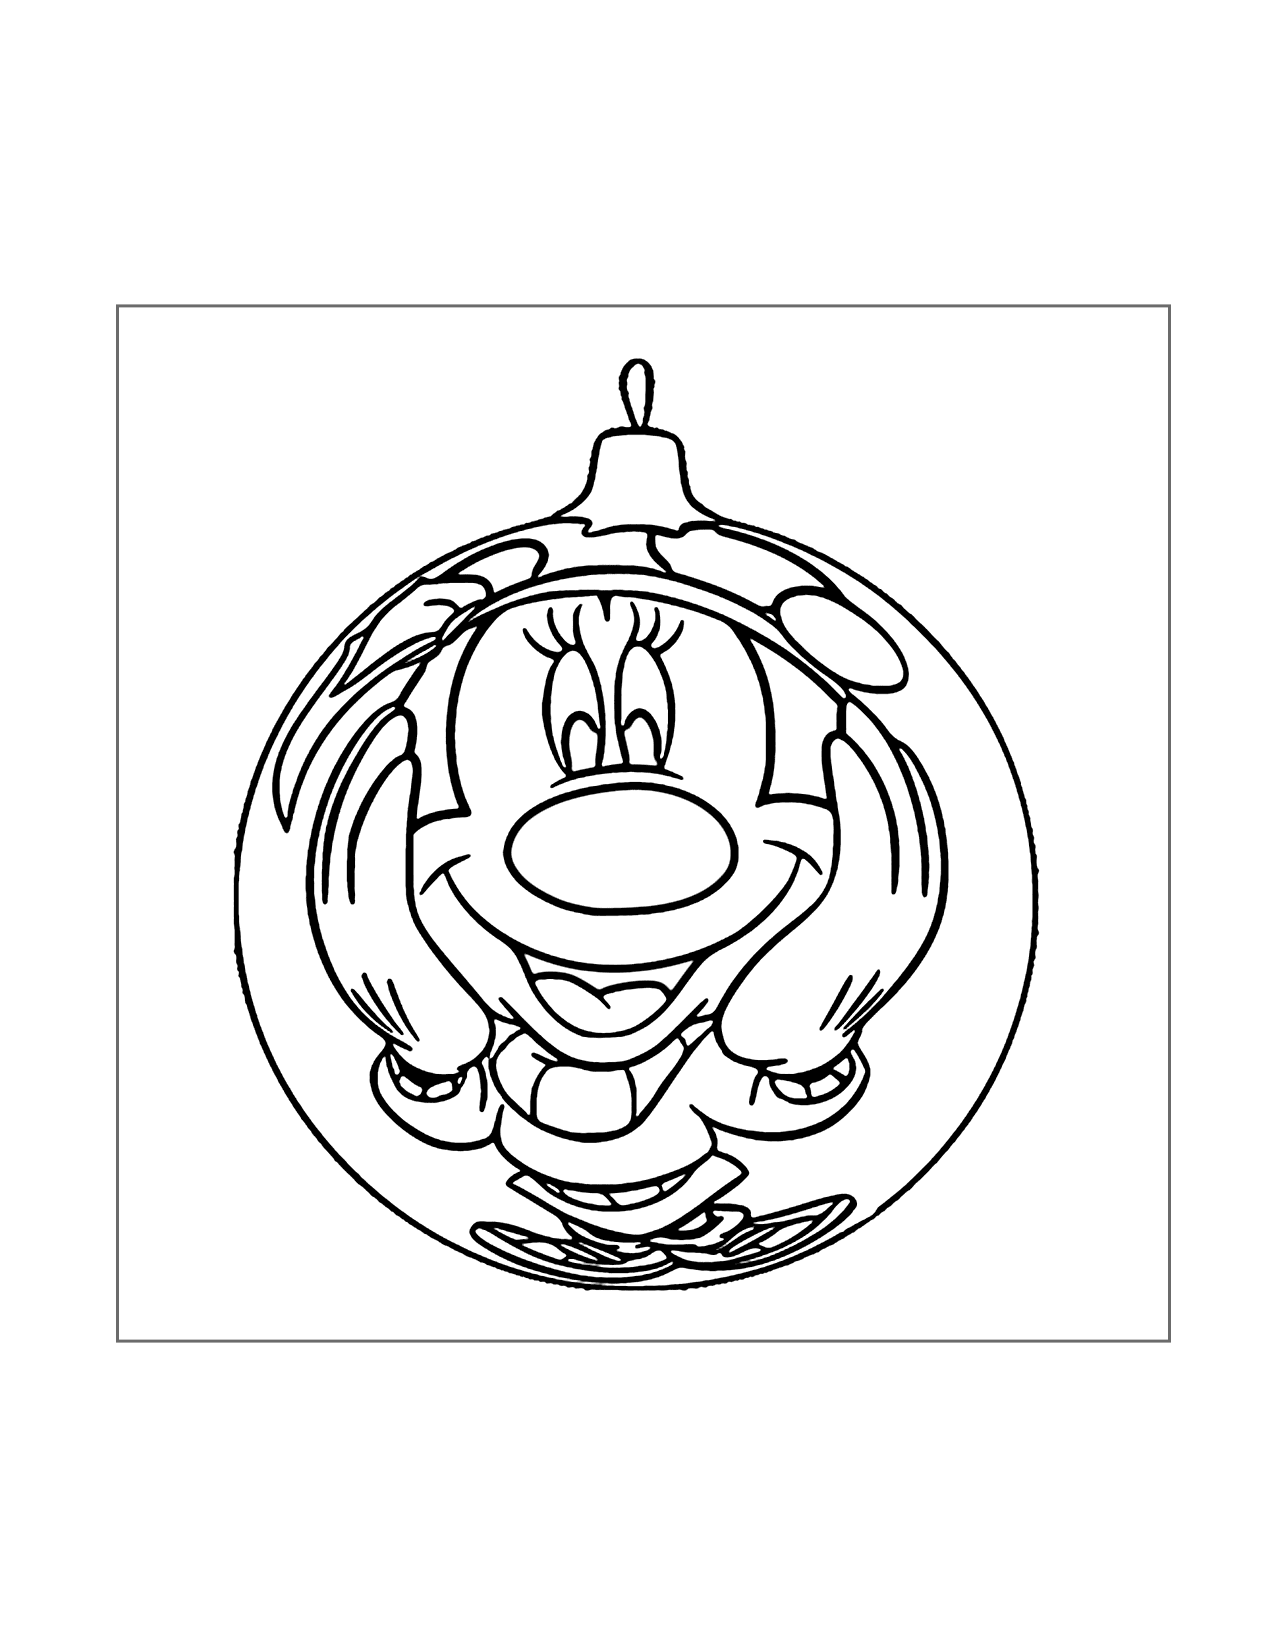 Minnie Mouse Looks Into An Ornament Coloring Page